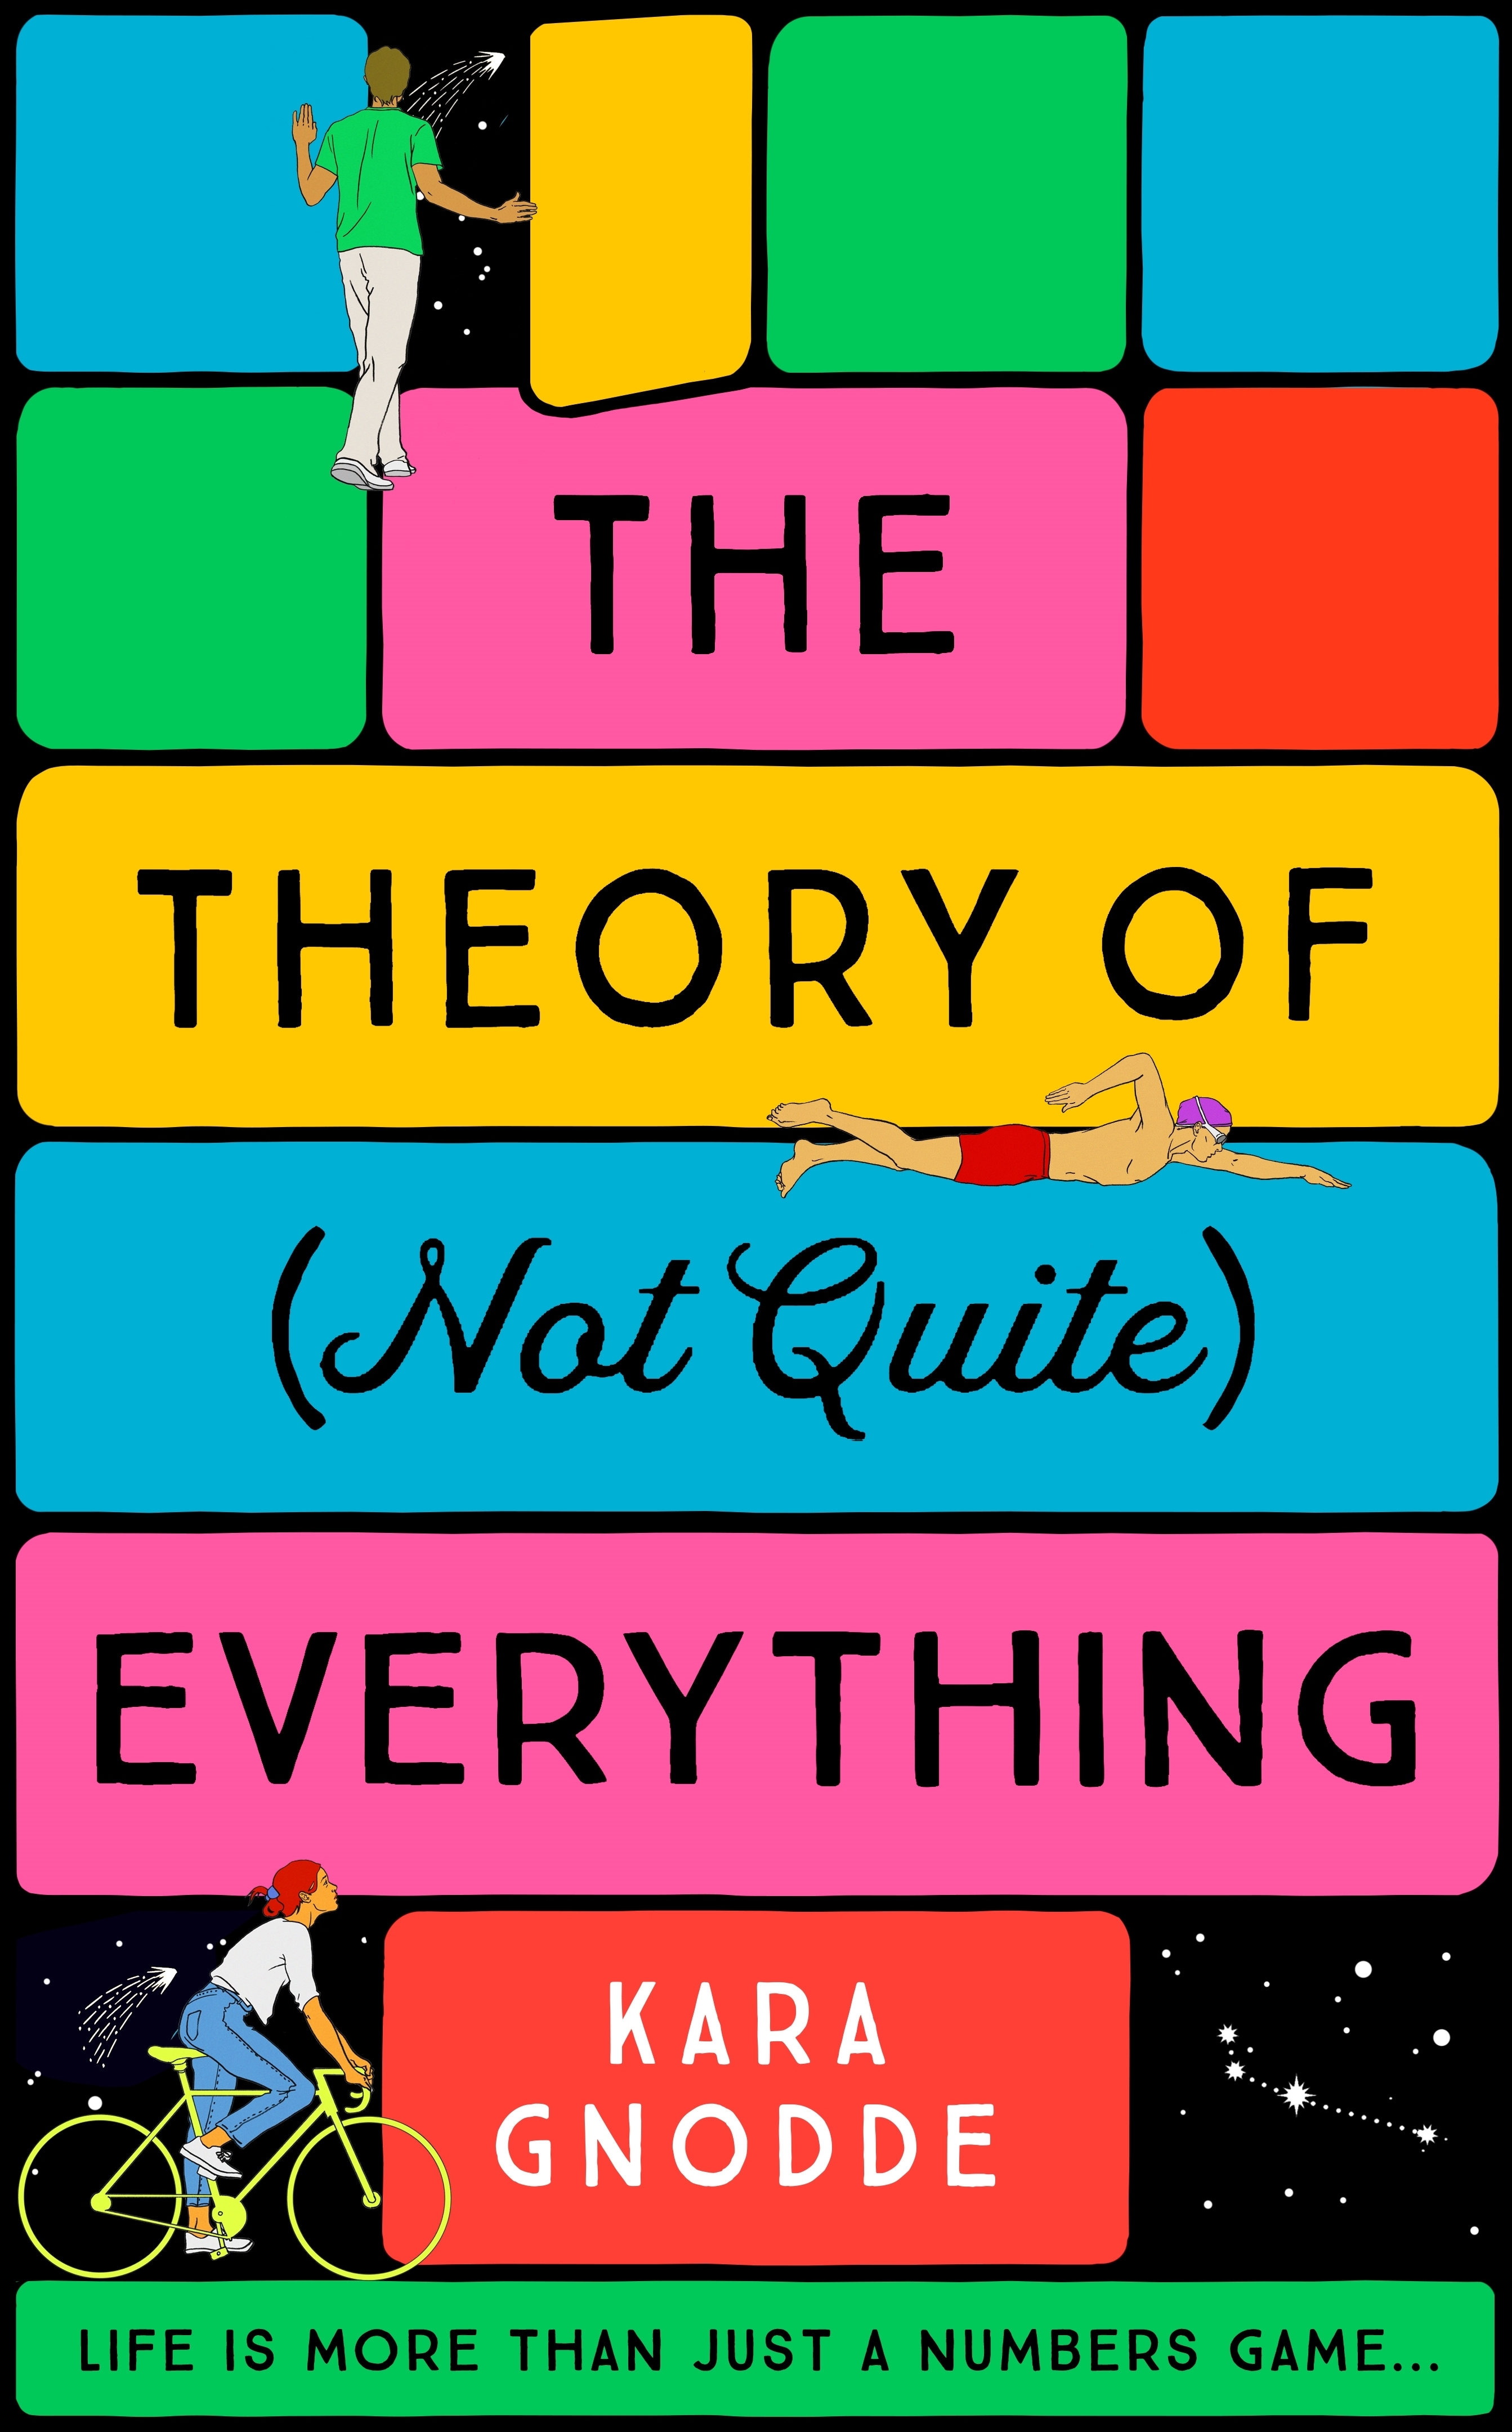 The Theory Of (Not Quite) Everything by Kara Gnodde